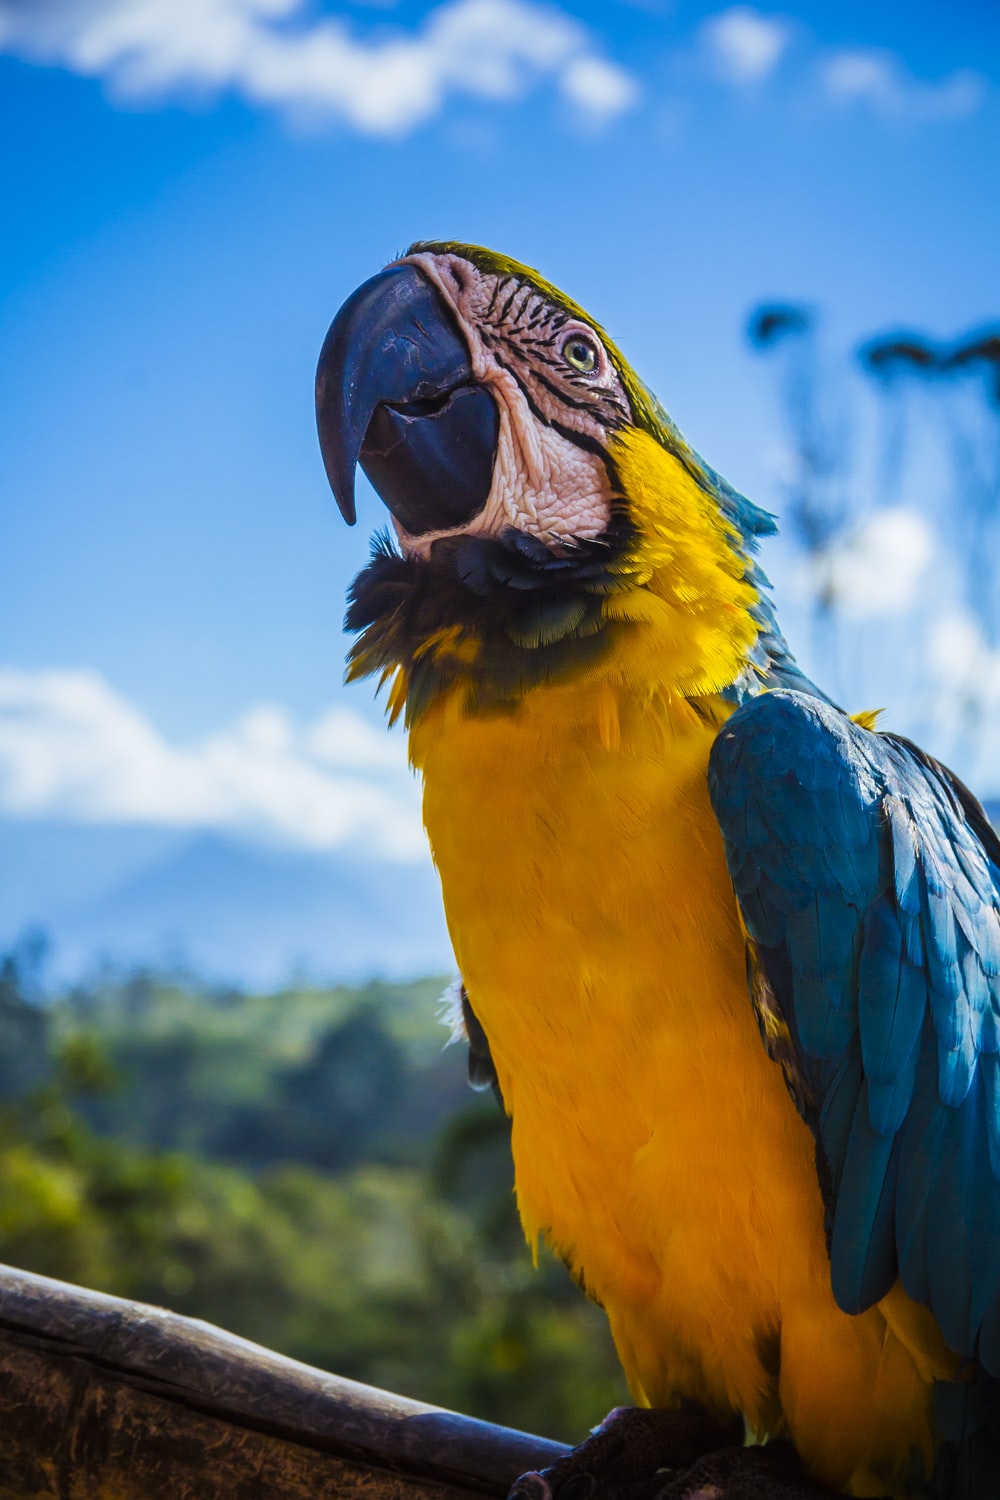 Macaw Parrot Picture. Download Free Image